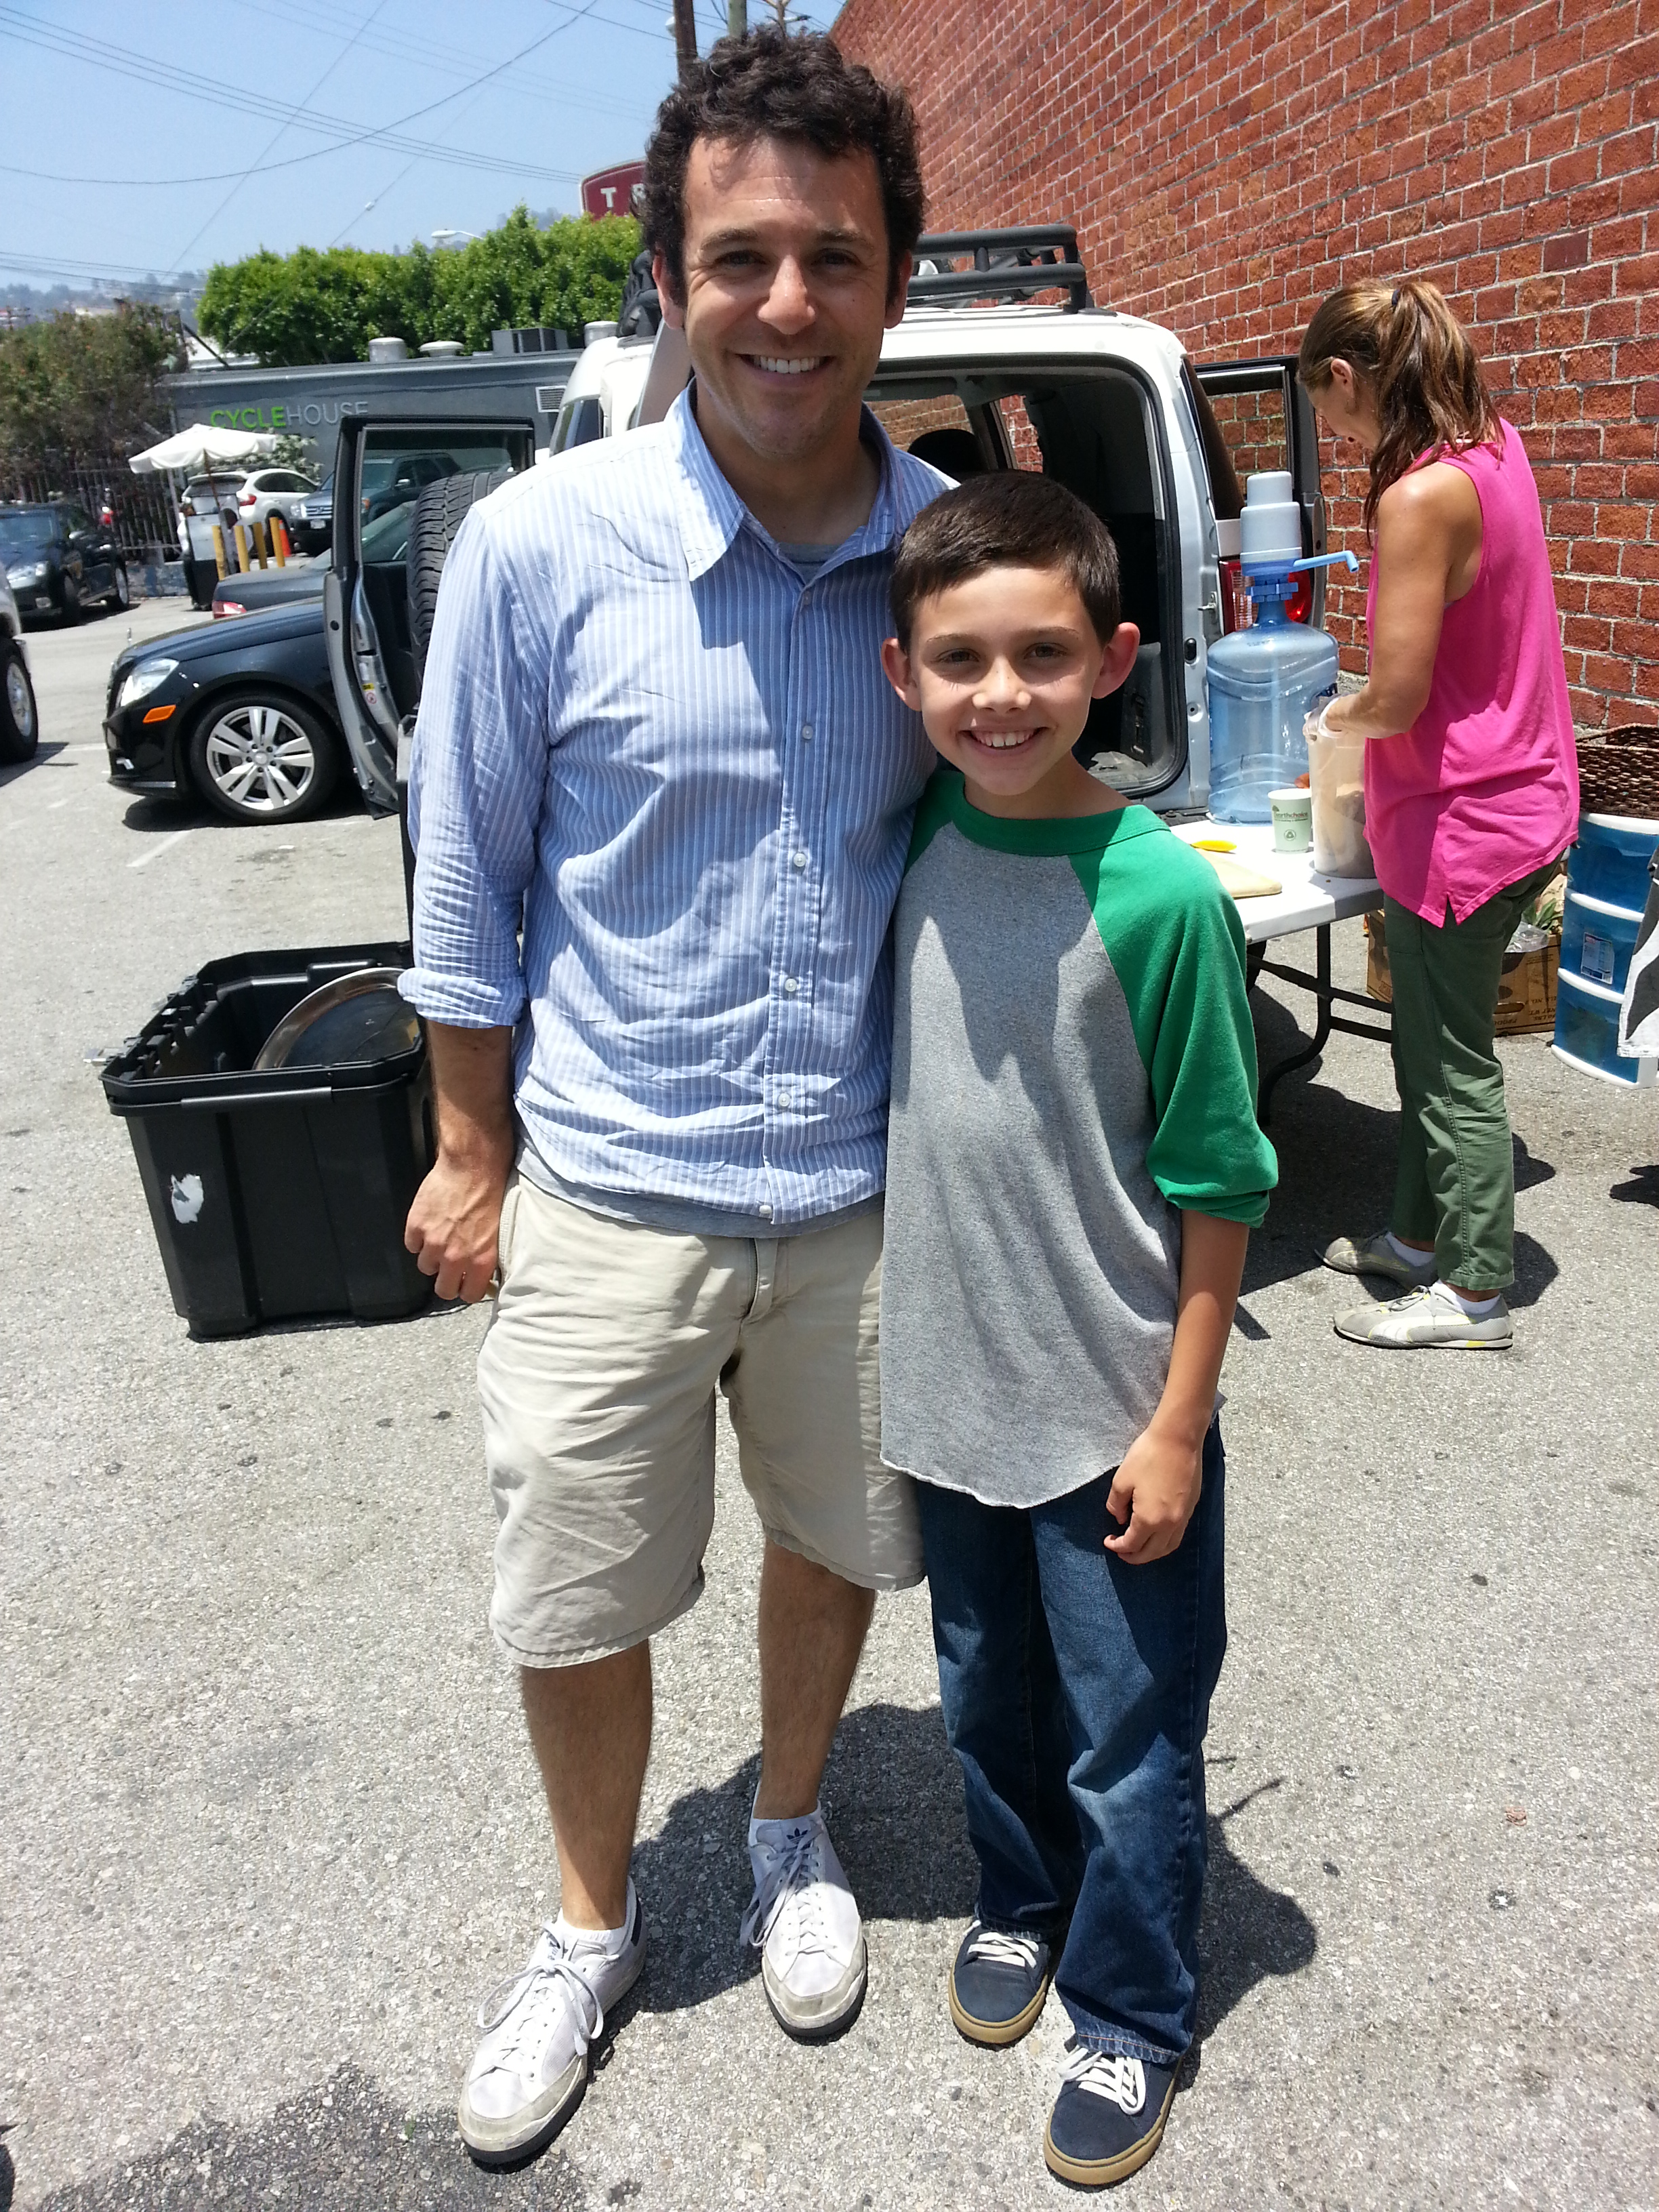 MasterCard Commercial shoot with Director Fred Savage (Wonder Years) ~ June 2013